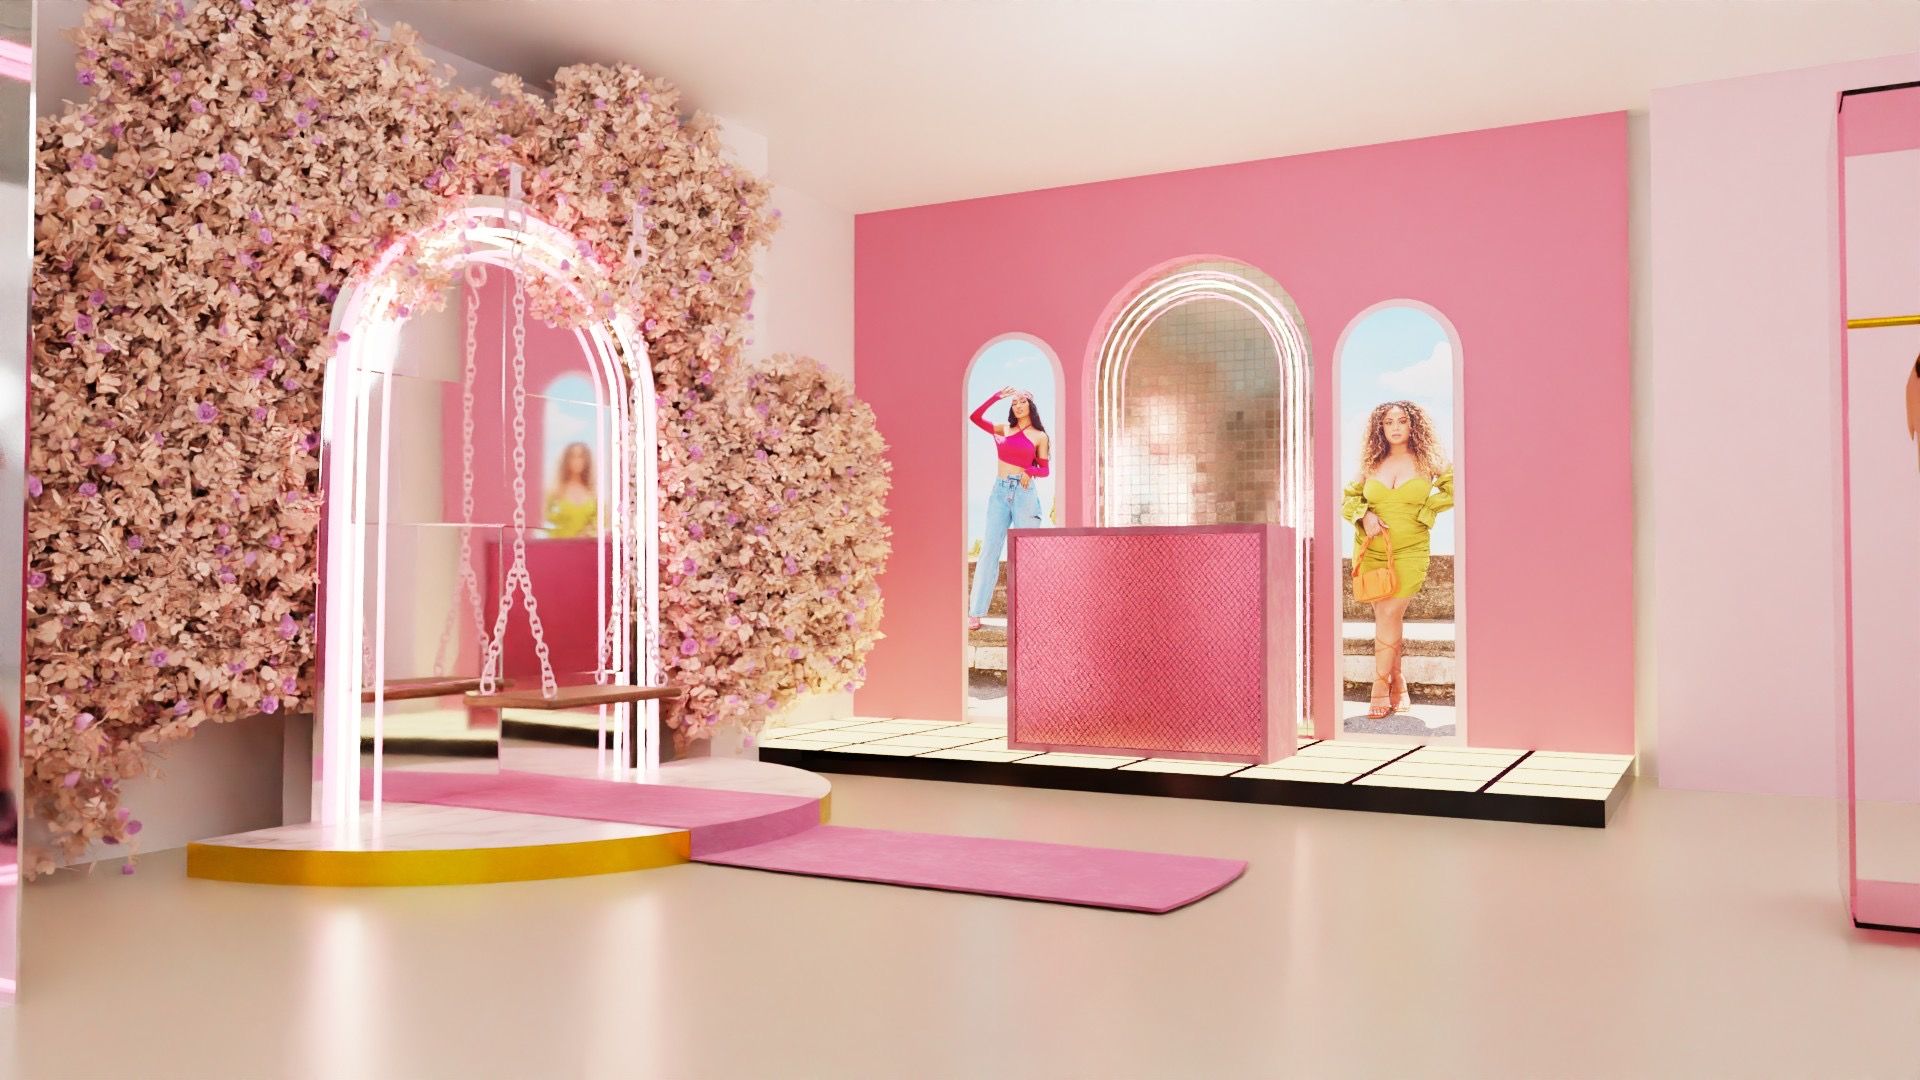 Prettylittlething signs new London office and showroom - Retail Gazette